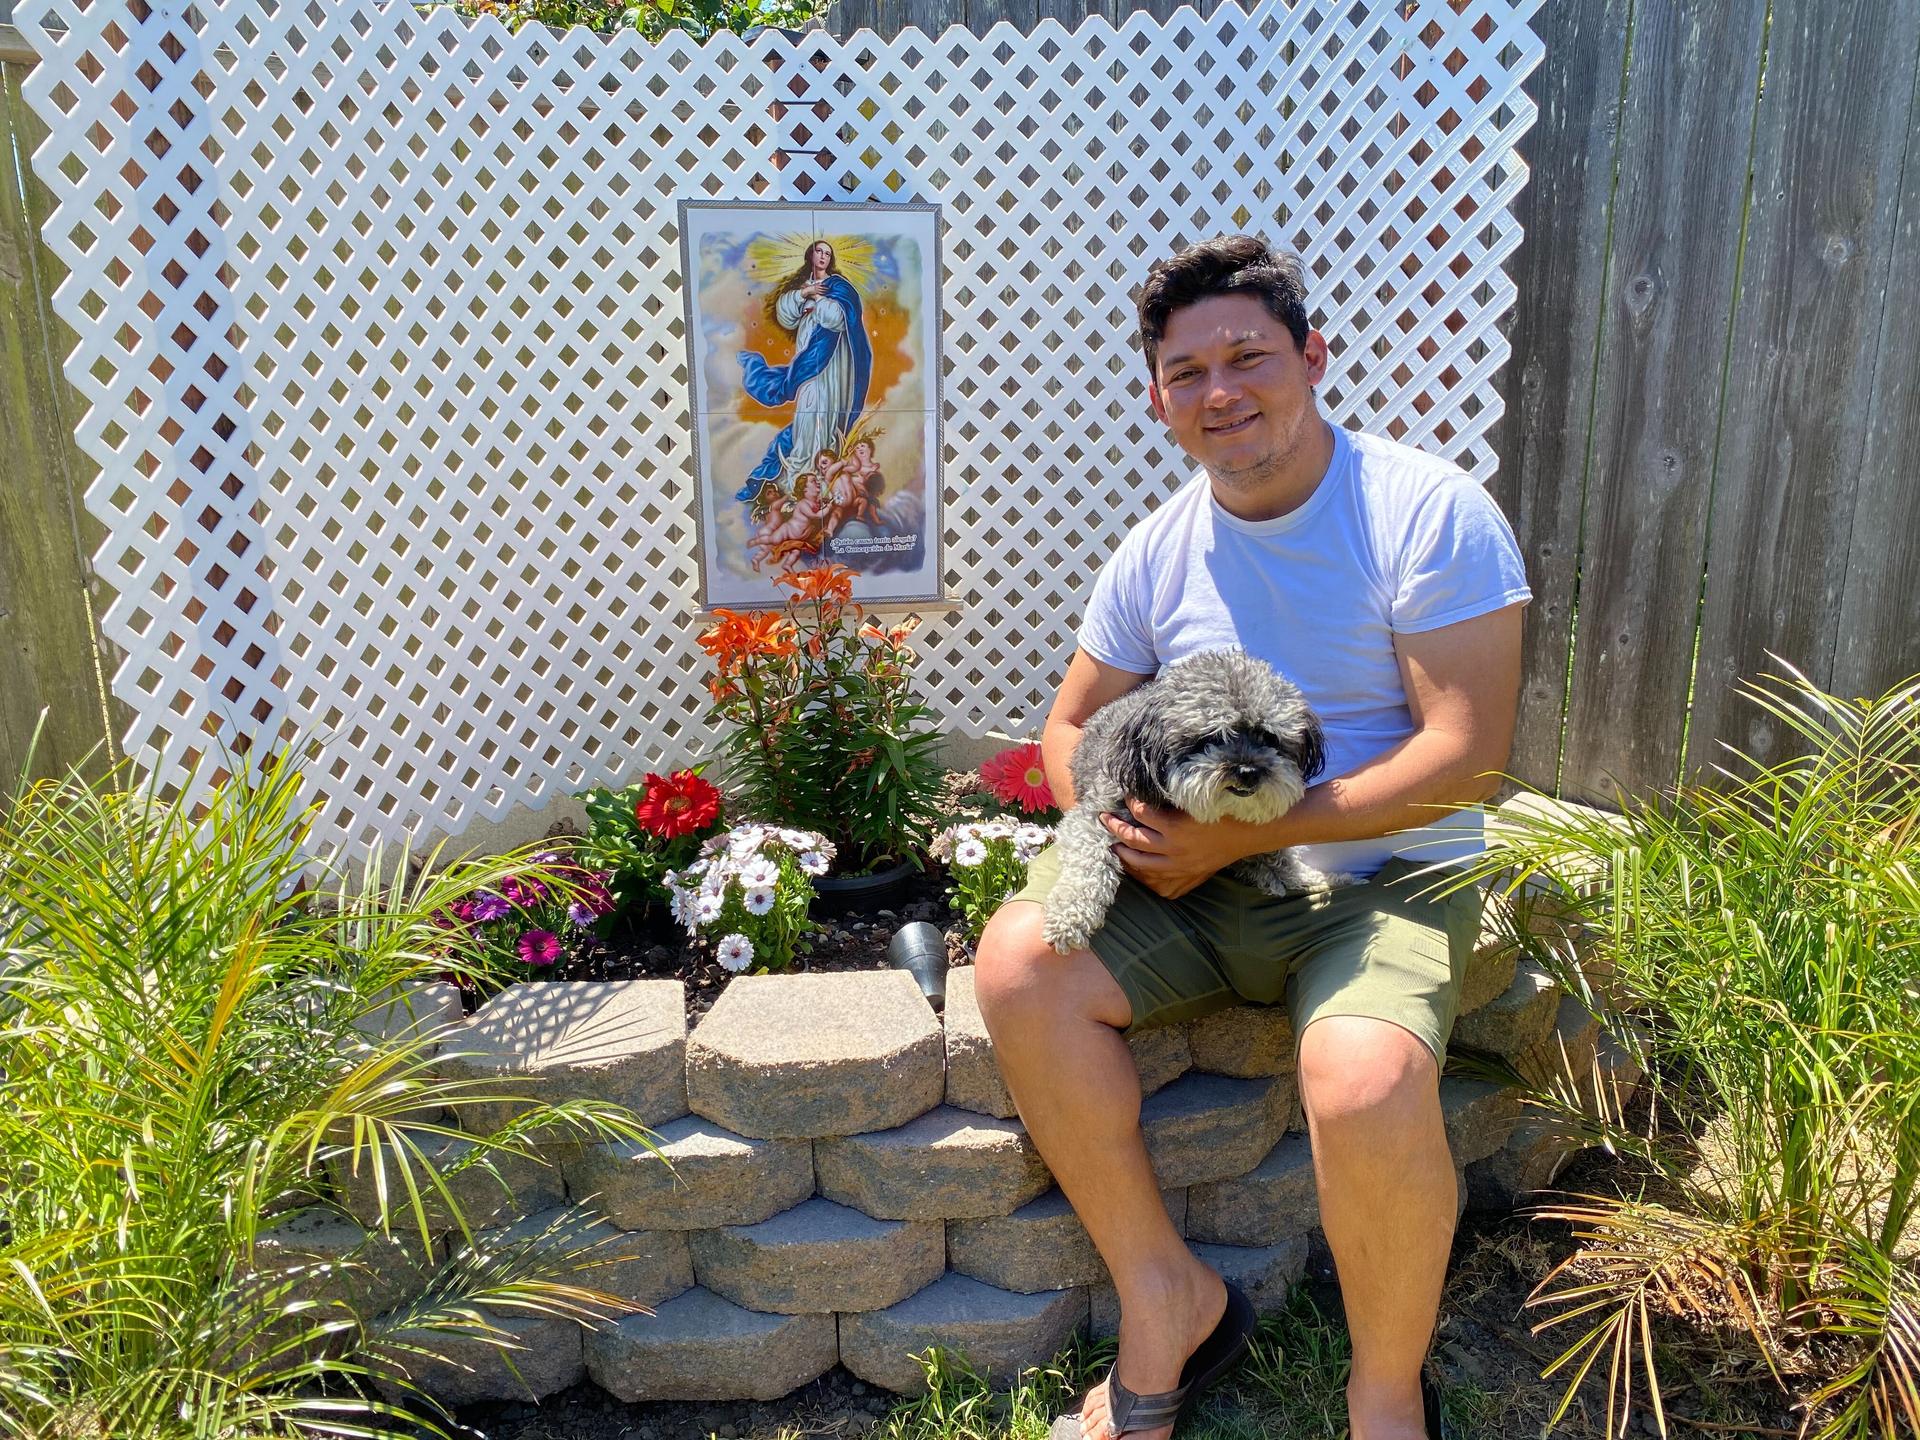 Sergio Armas, a Nicaraguan immigrant living in San Francisco, built an altar to the Virgin Mary in the corner of his yard after the coronavirus pandemic hit.